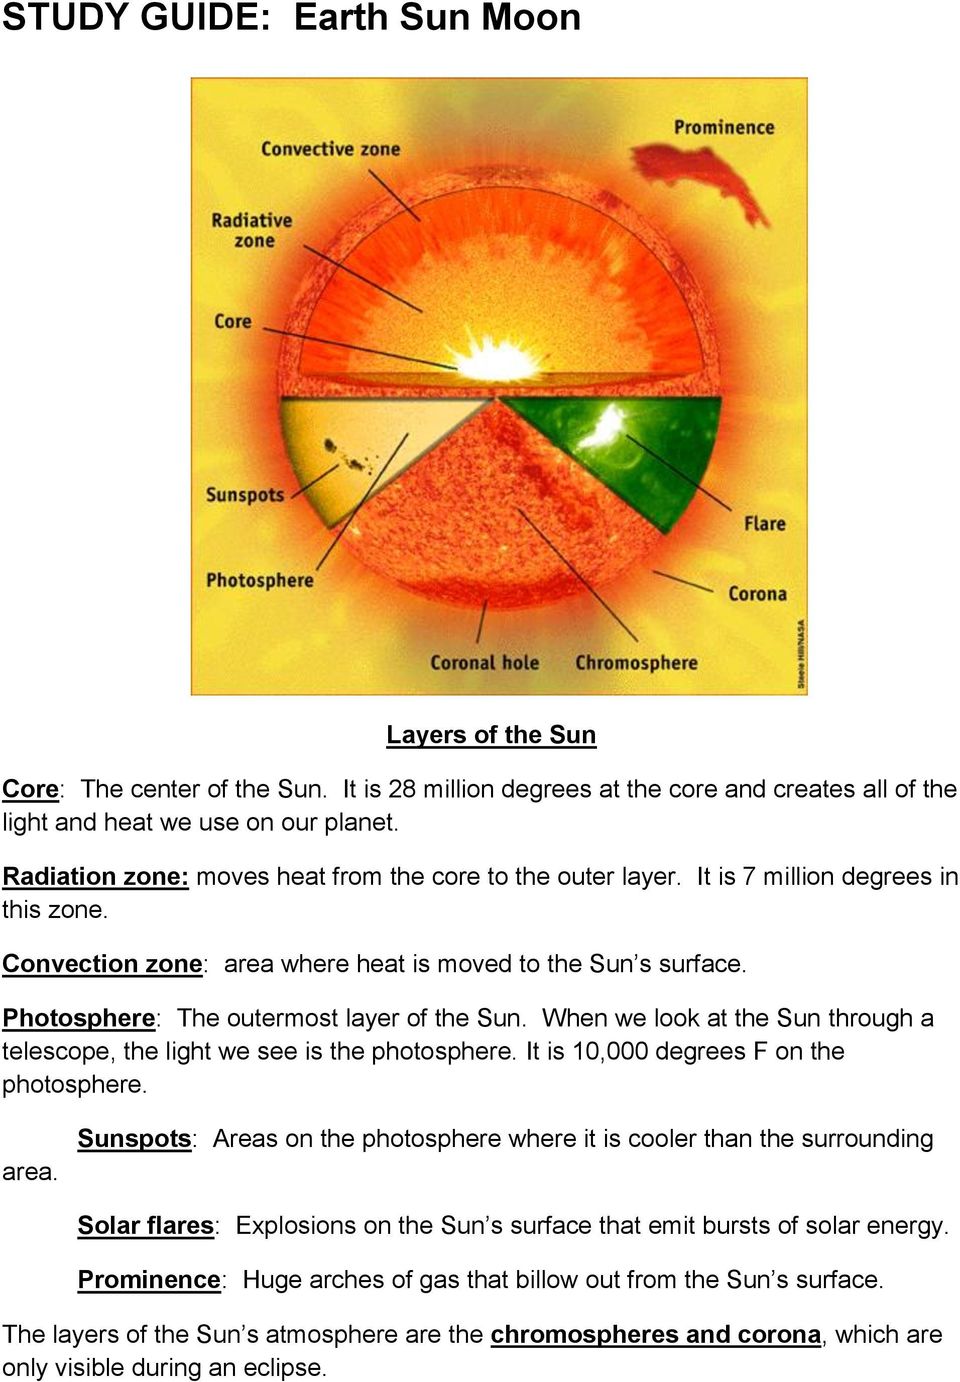 Photosphere: The outermost layer of the Sun. When we look at the Sun through a telescope, the light we see is the photosphere. It is 10,000 degrees F on the photosphere. area.